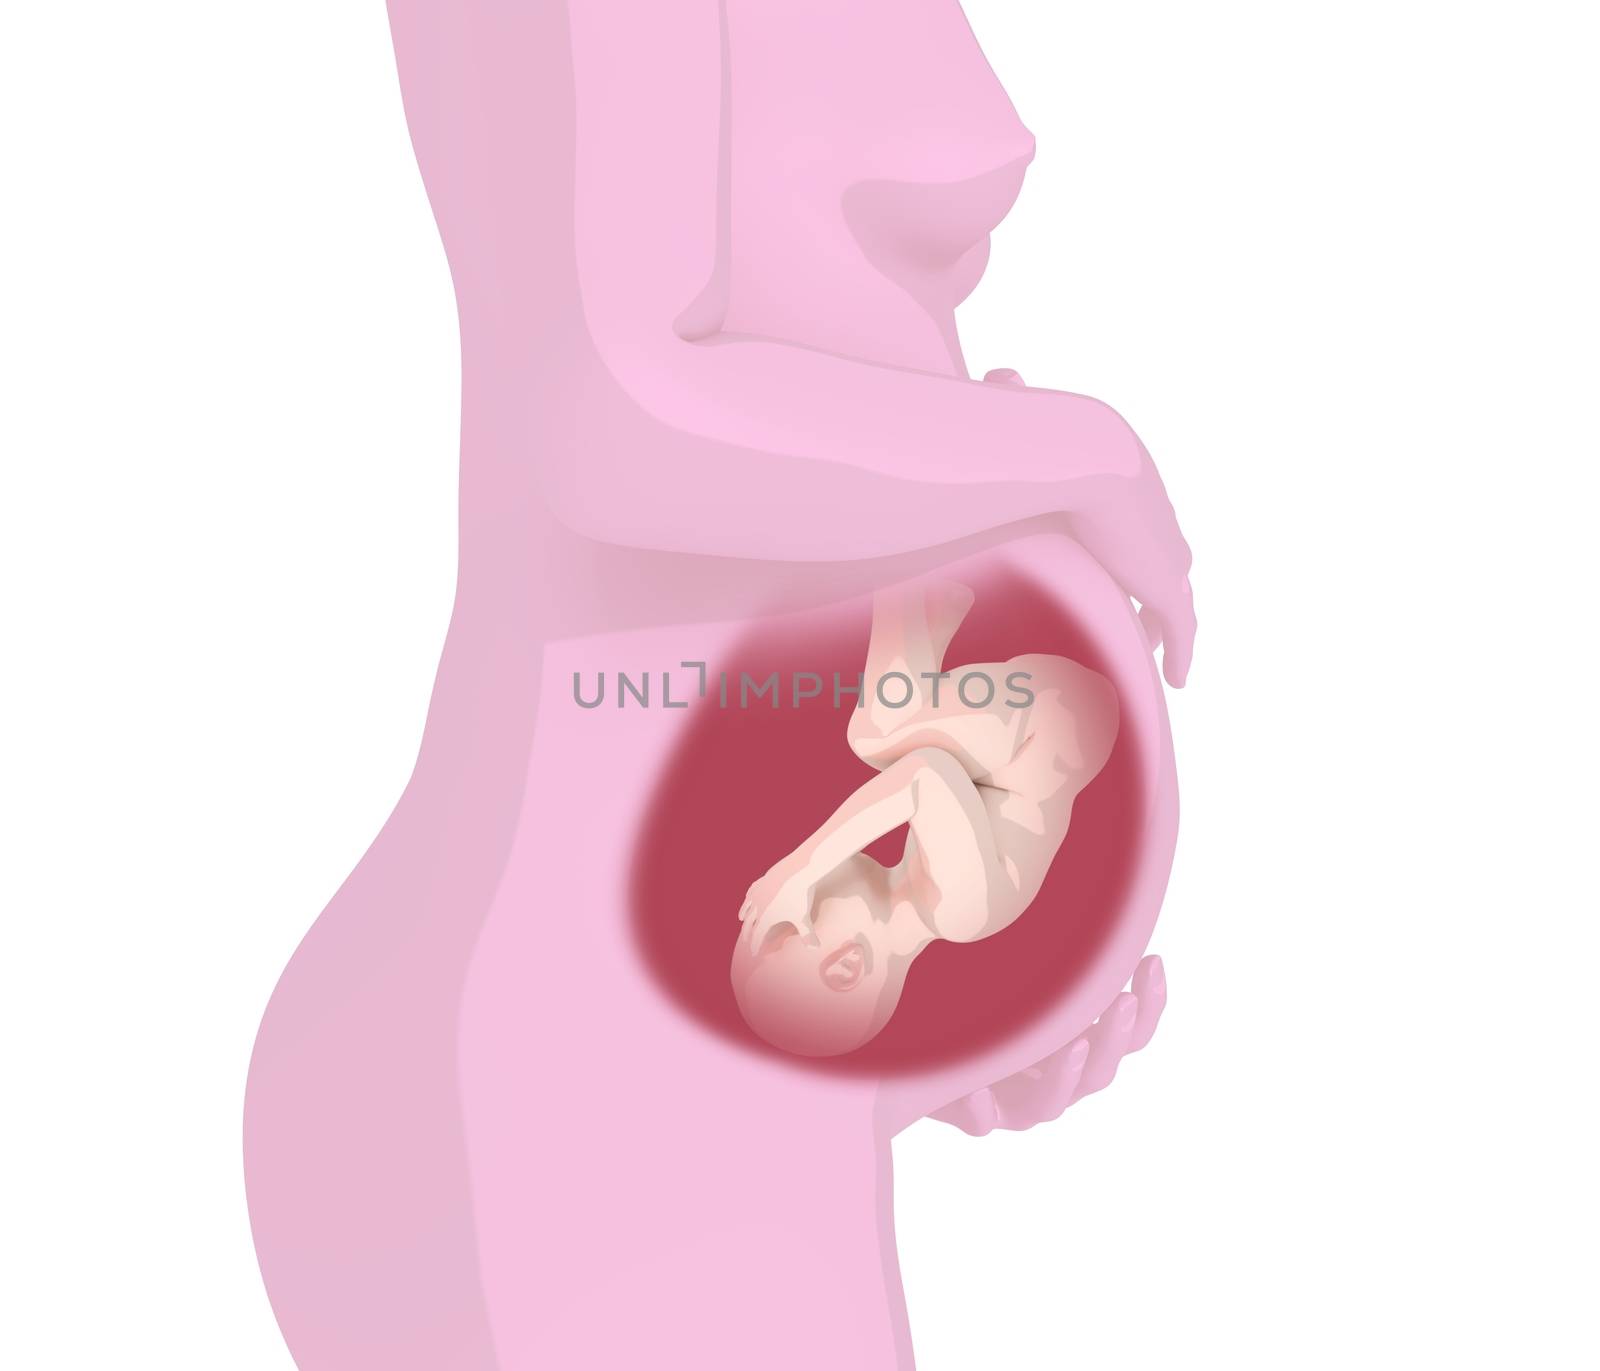 Illustration of a child inside the womb of the mother